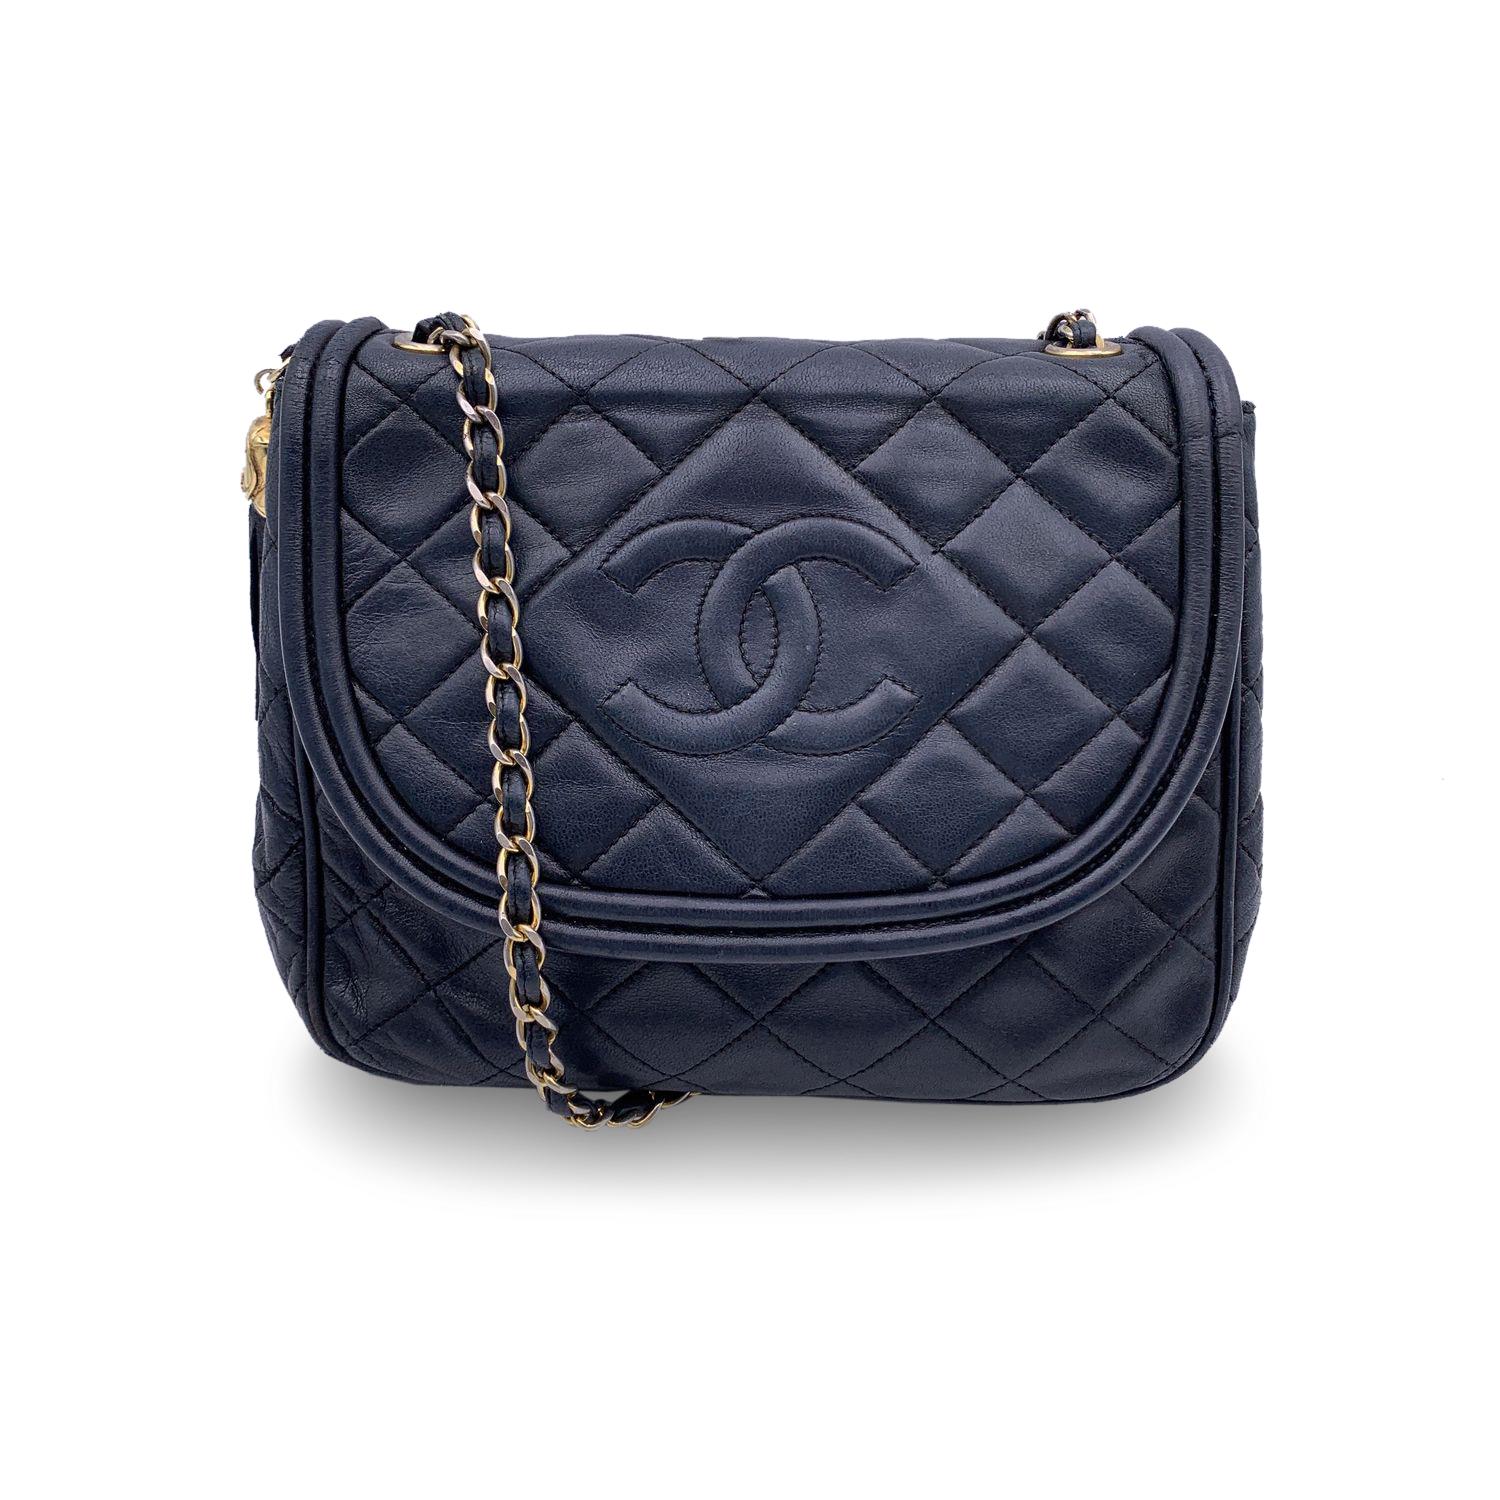 Vintage Chanel shoulder bag in navy blue quilted leather. Flap with magnetic button closure. CC logo on the front. Leather lining. Tassel detail on the side. Blue leather lining. 1 side zip pocket inside. Gorgeous gold metal strap with interwoven